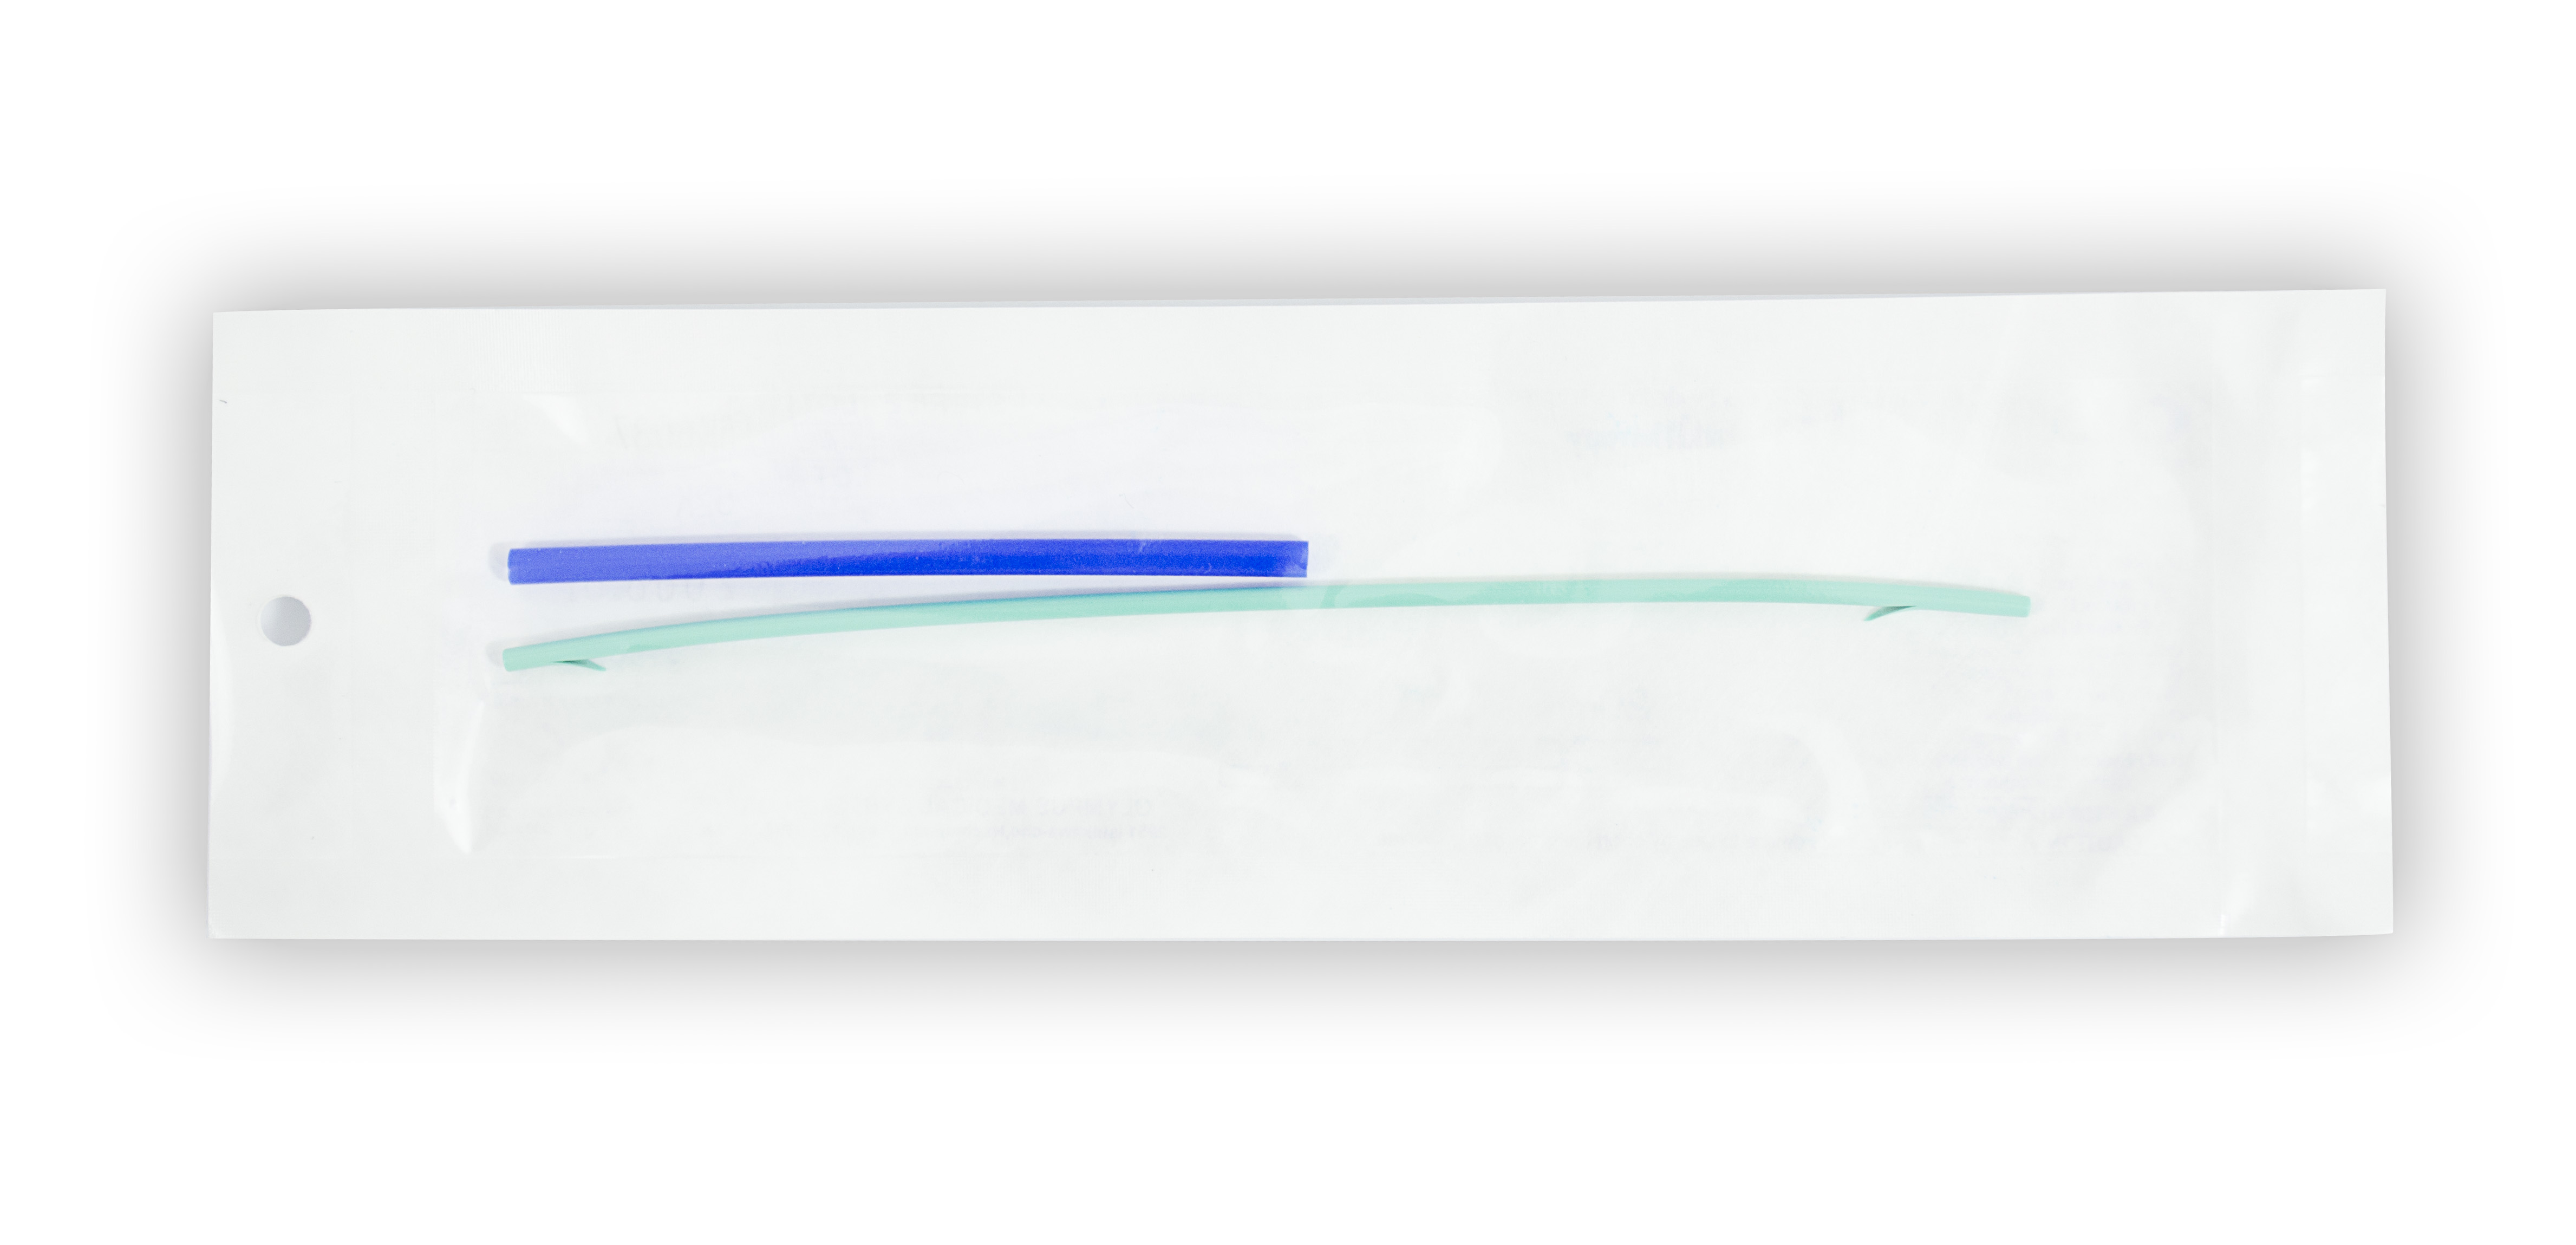 [Out-of-Date] Olympus Disposable Biliary Drainage Tube - PBD-200-0815